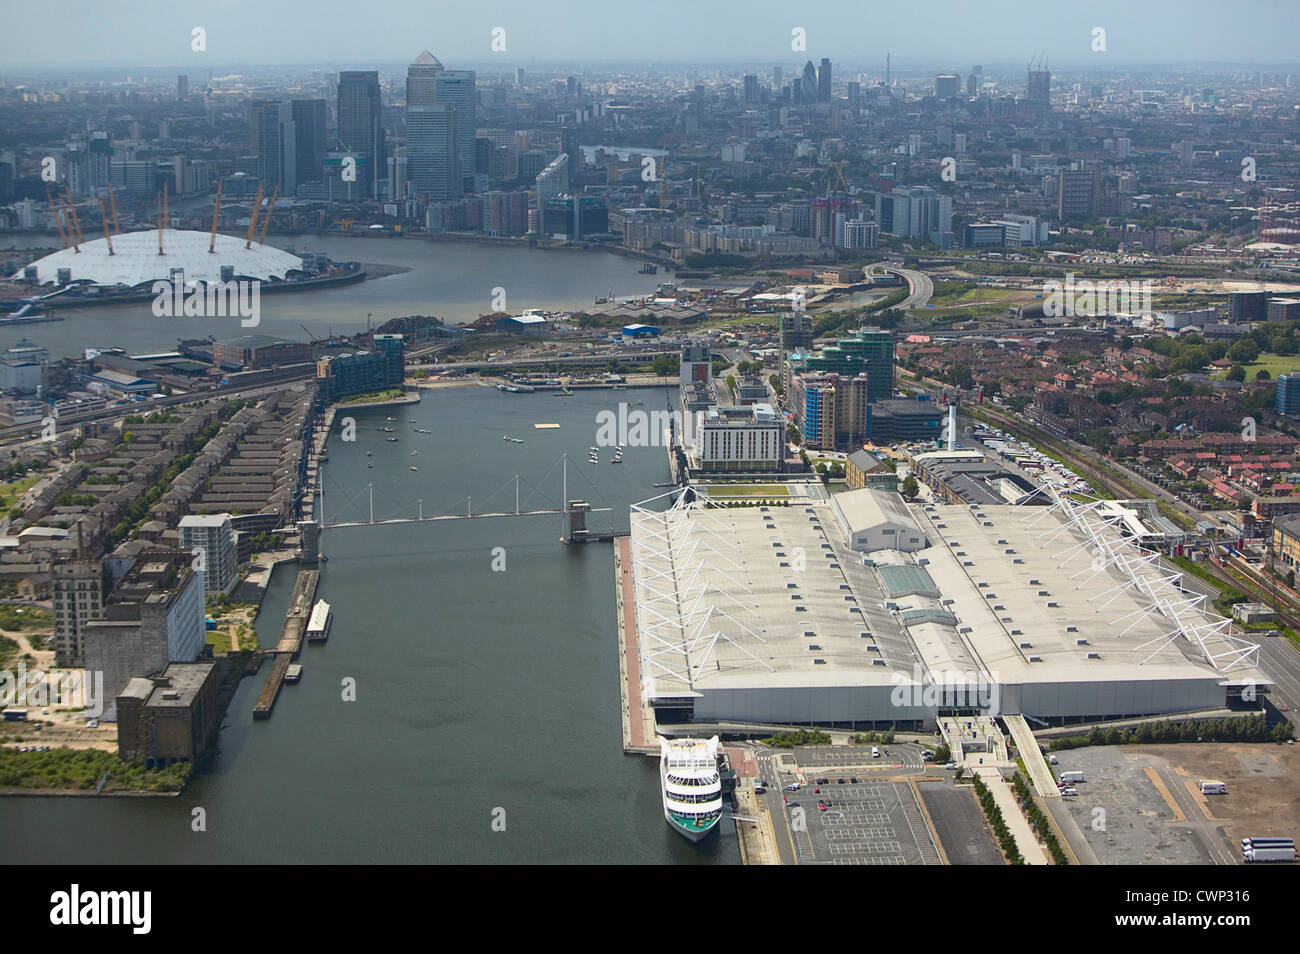 Aerial view of the ExCel Exhibition Centre, Royal Victoria Dock, the Millennium Dome and Canary Wharf, Thames Gateway, London. Stock Photo